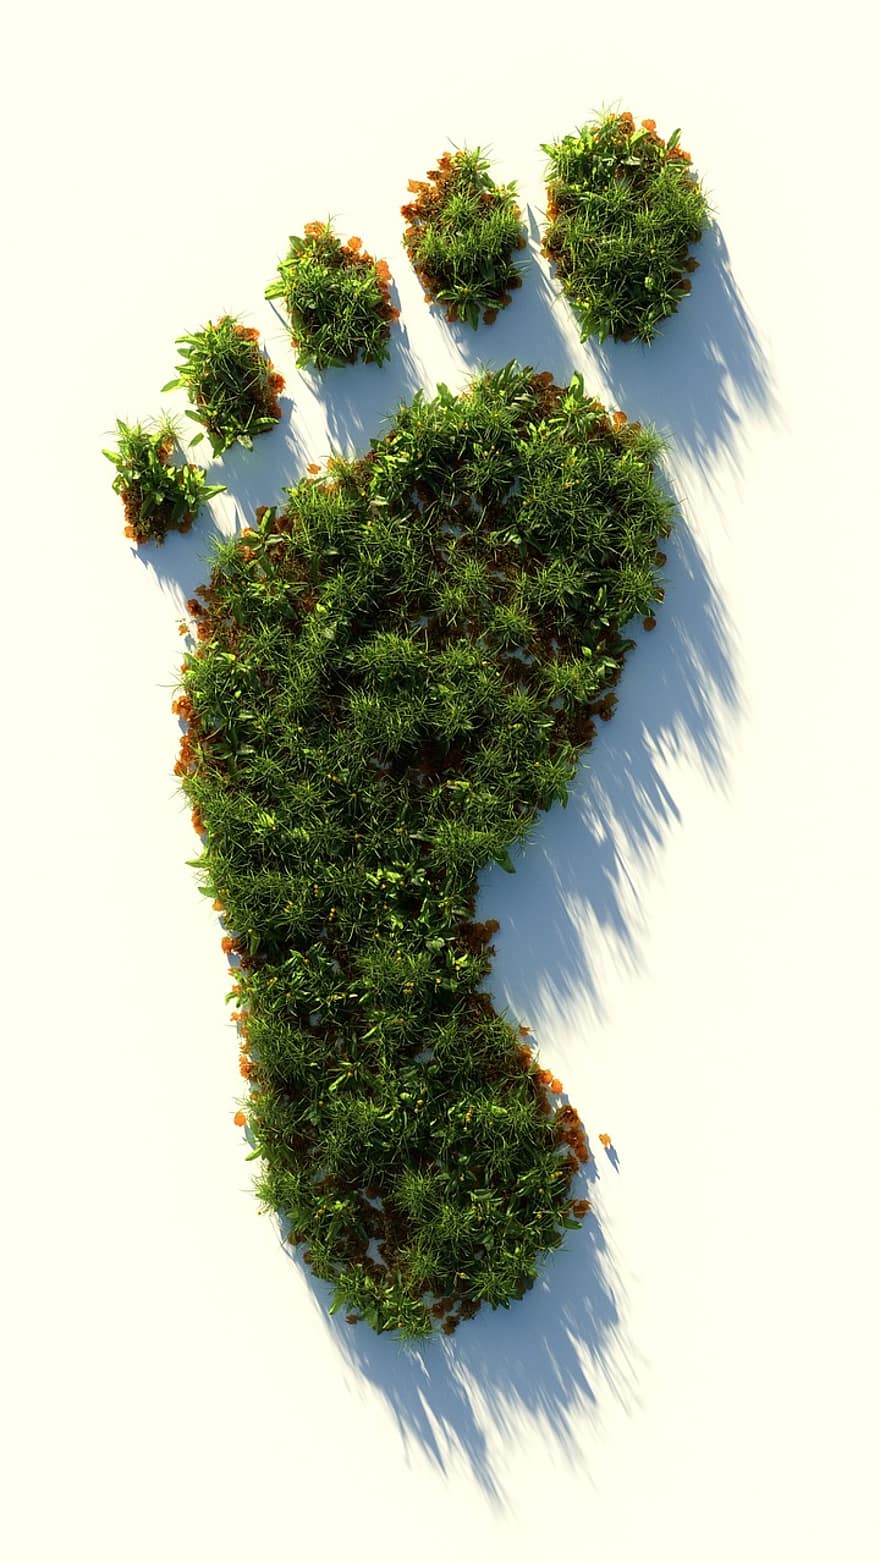 Green, Healthy, Footprint, Ecological Footprint, Climate Change, Plant, Agriculture, Environment, Sustainable